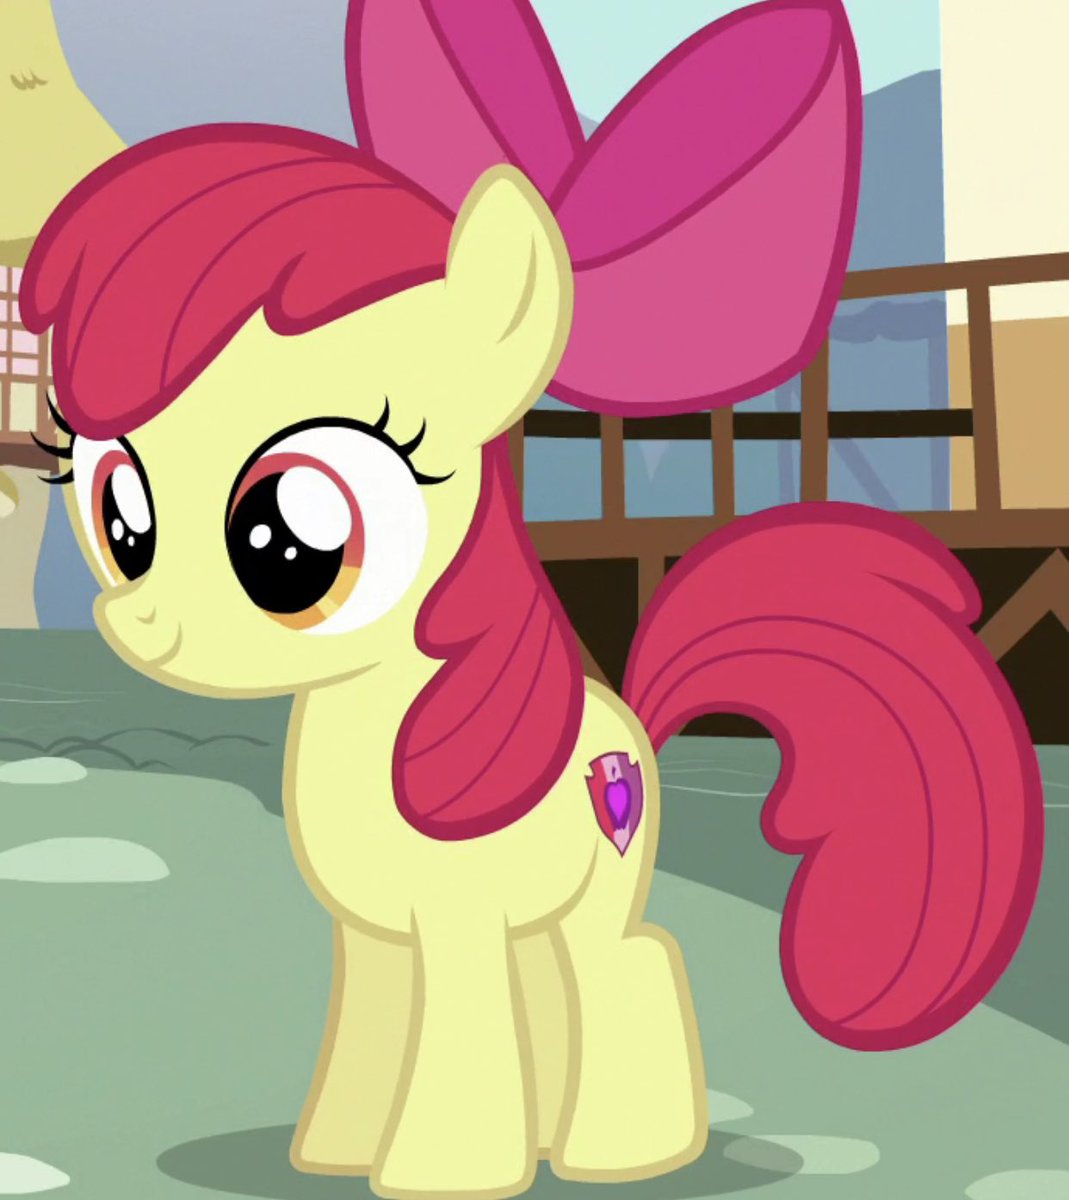 Suga as Apple Bloom- despite being at a disadvantage (not in the starting lineup, no cutie mark), they’re determined to forge their own paths; become great through their own efforts- persistent, loyal to their friends- help others become better by motivating them (selfless)